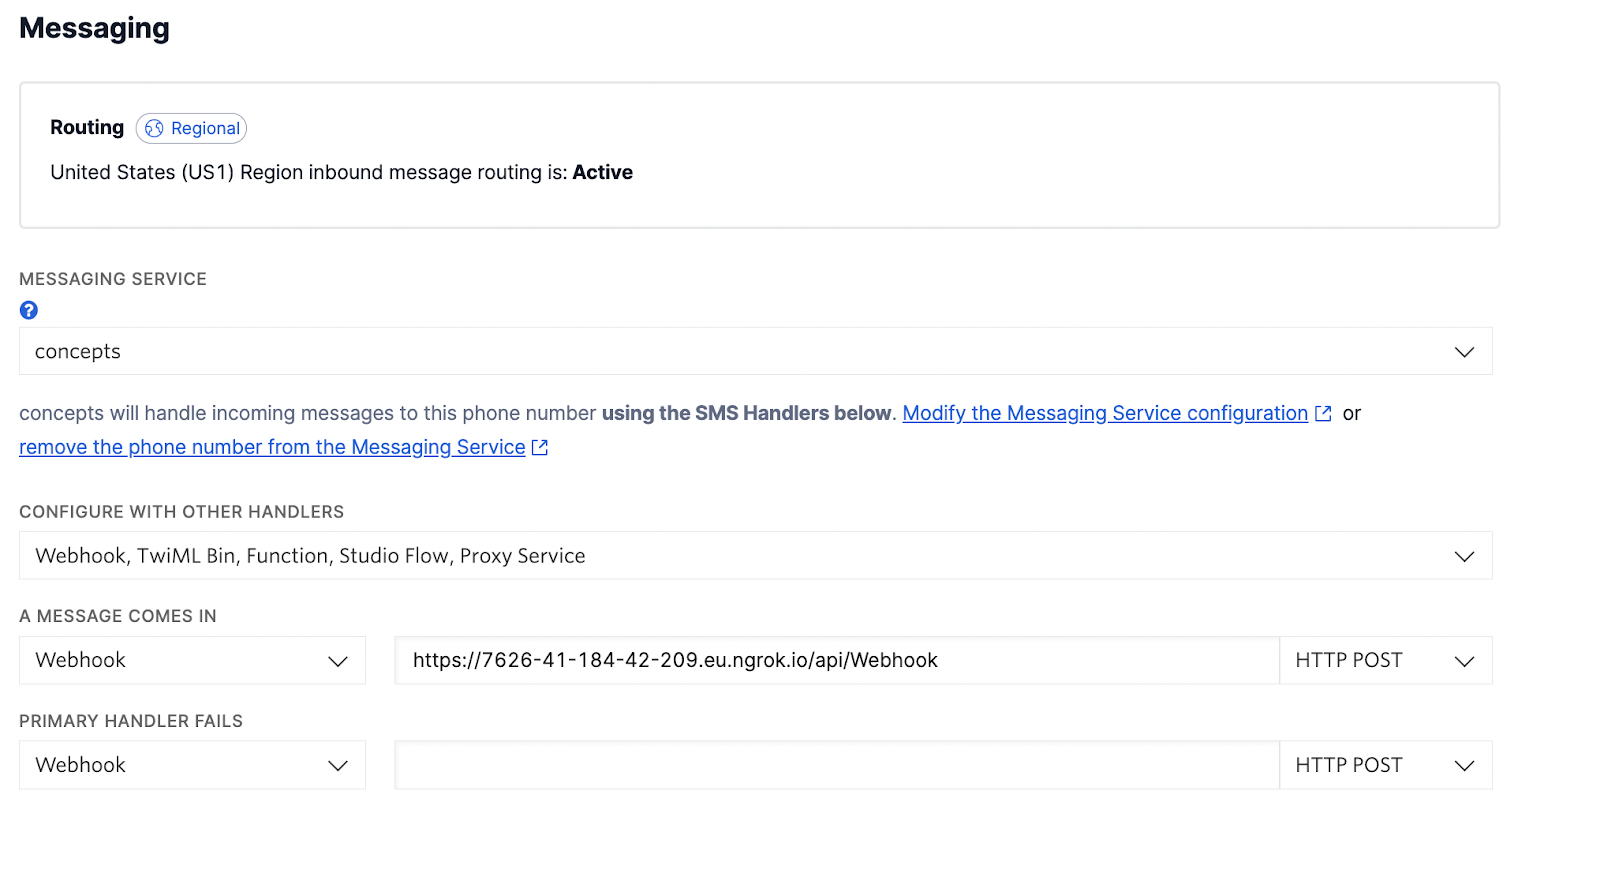 The Messaging section of the Twilio Phone Number configuration form.  You can see under "A MESSAGE COMES IN", a dropdown is set to "Webhook", followed by a text field with the ngrok forwarding URL and path to the webhook, followed by a dropdown set to "HTTP POST".